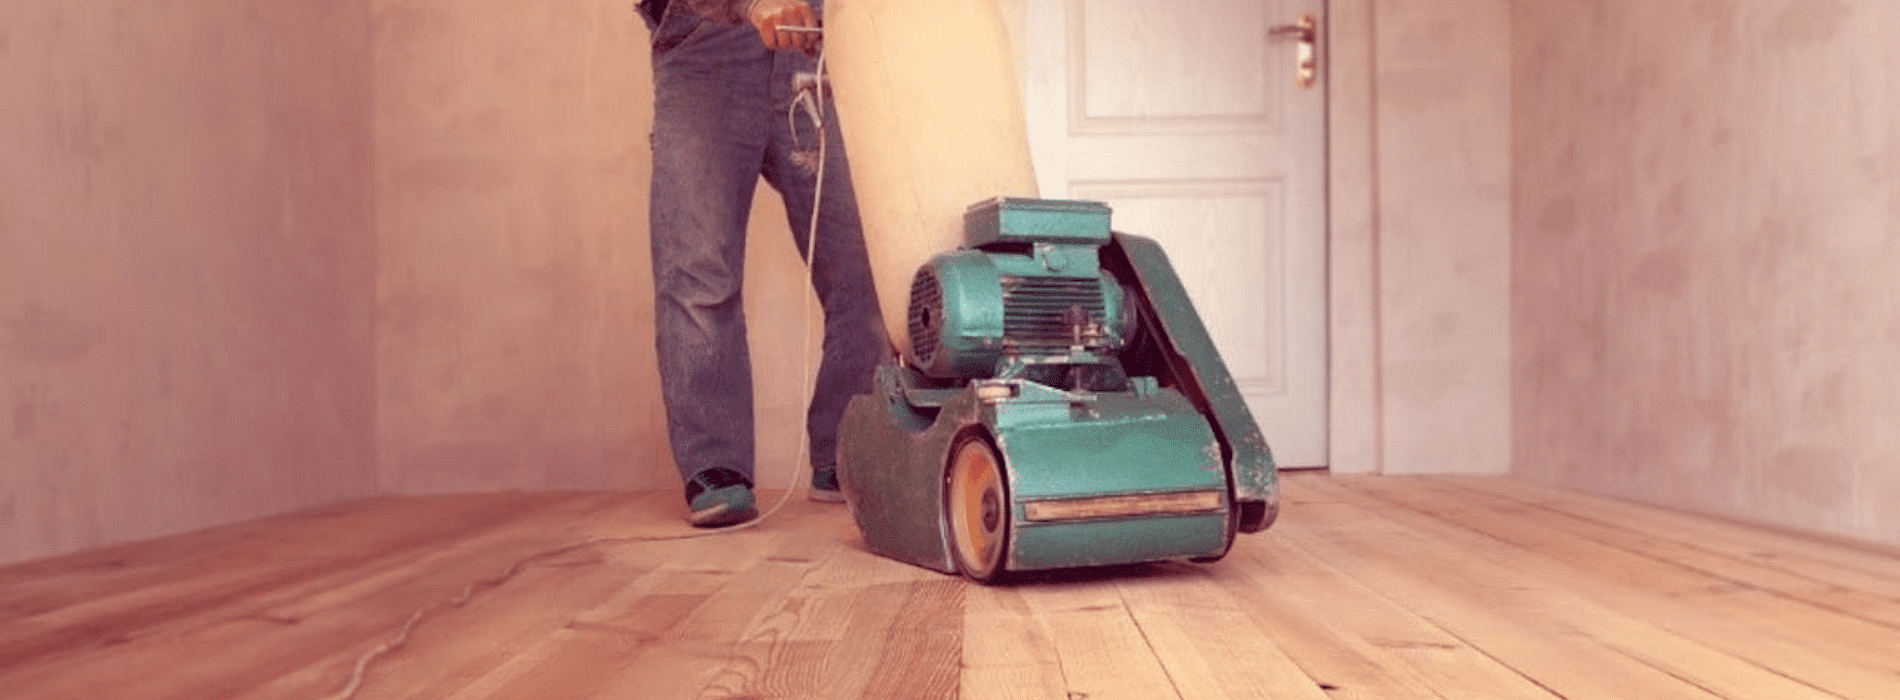 In Collier Row, RM5, Mr Sander® revitalize parquet flooring using a high-powered 2.2kW, 220V Bona belt sander. Witness their dedication to excellence as the HEPA-filtered dust extraction system ensures a pristine and efficient sanding process, unveiling stunning floor restoration results.